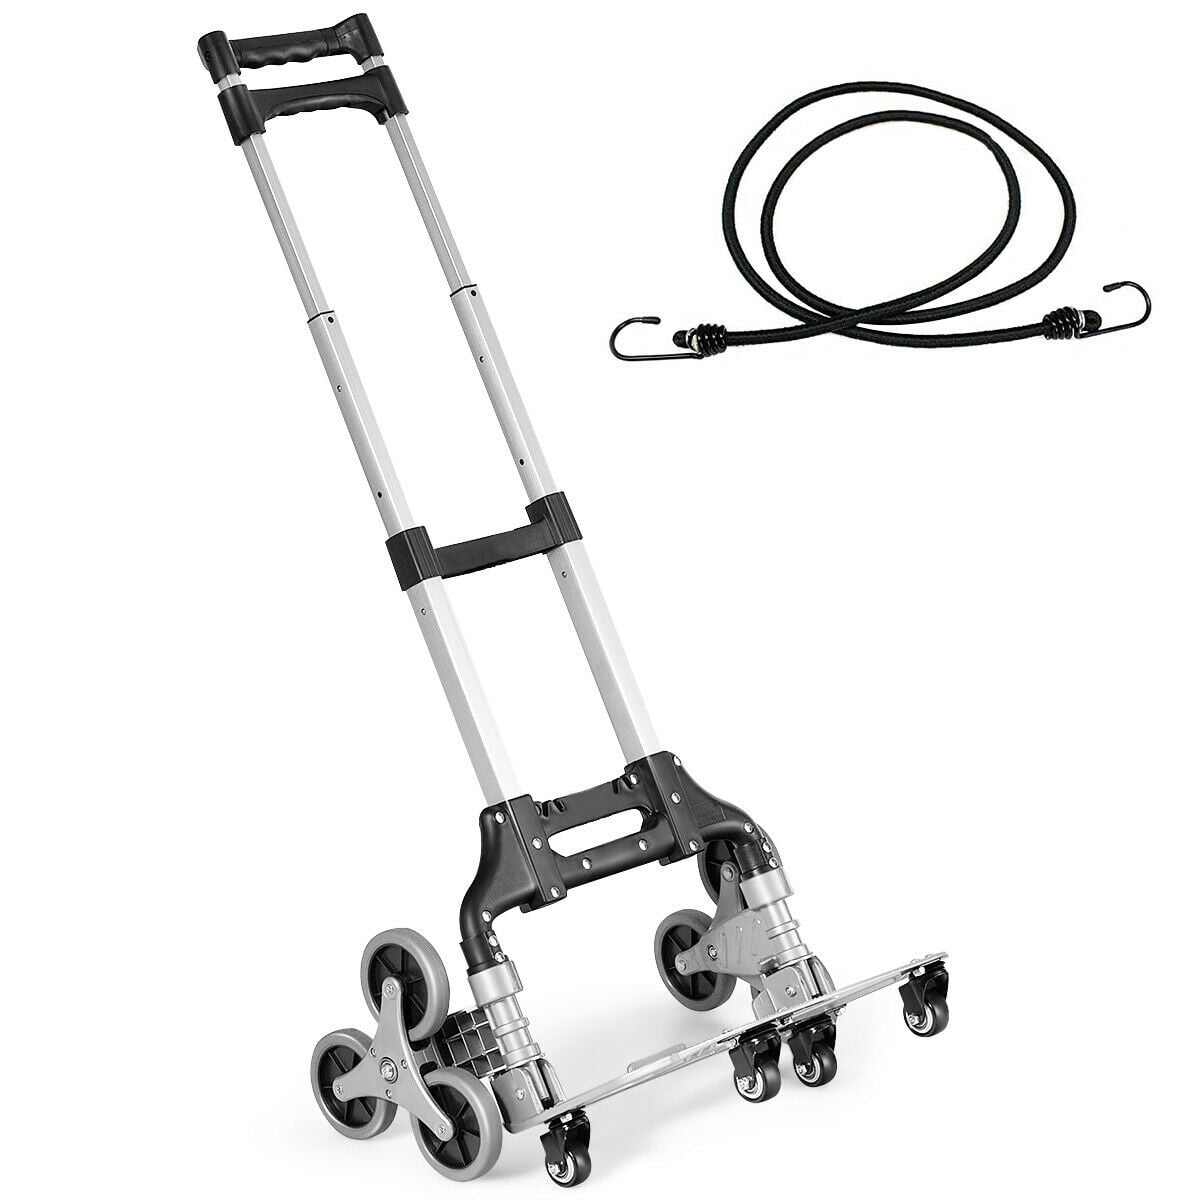 220lbs Portable Folding Hand Truck Cart Dolly Collapsible Luggage Trolley Cart 